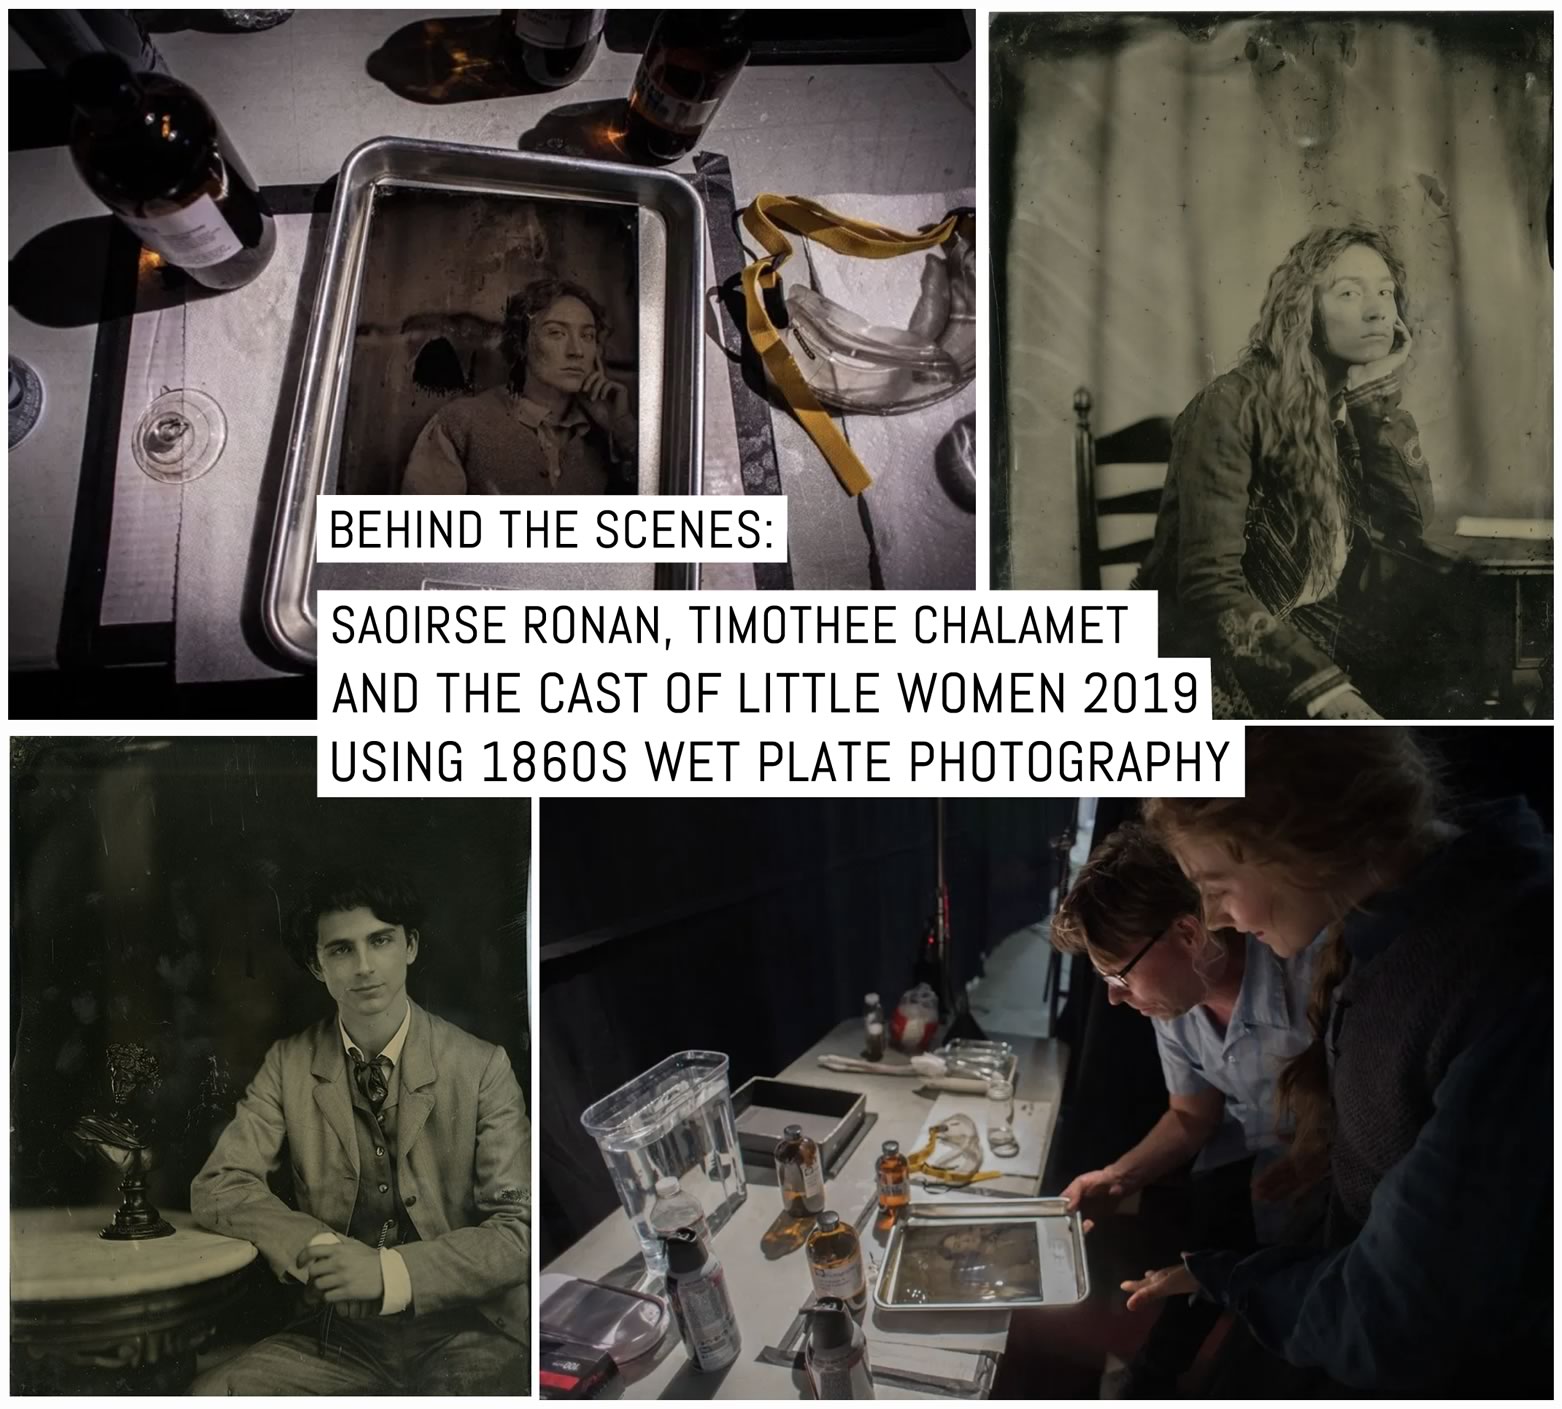 Behind the scenes with Saoirse Ronan, Timothée Chalamet and the cast of Little Women on 1860s wet plate photography + photographer Q&A